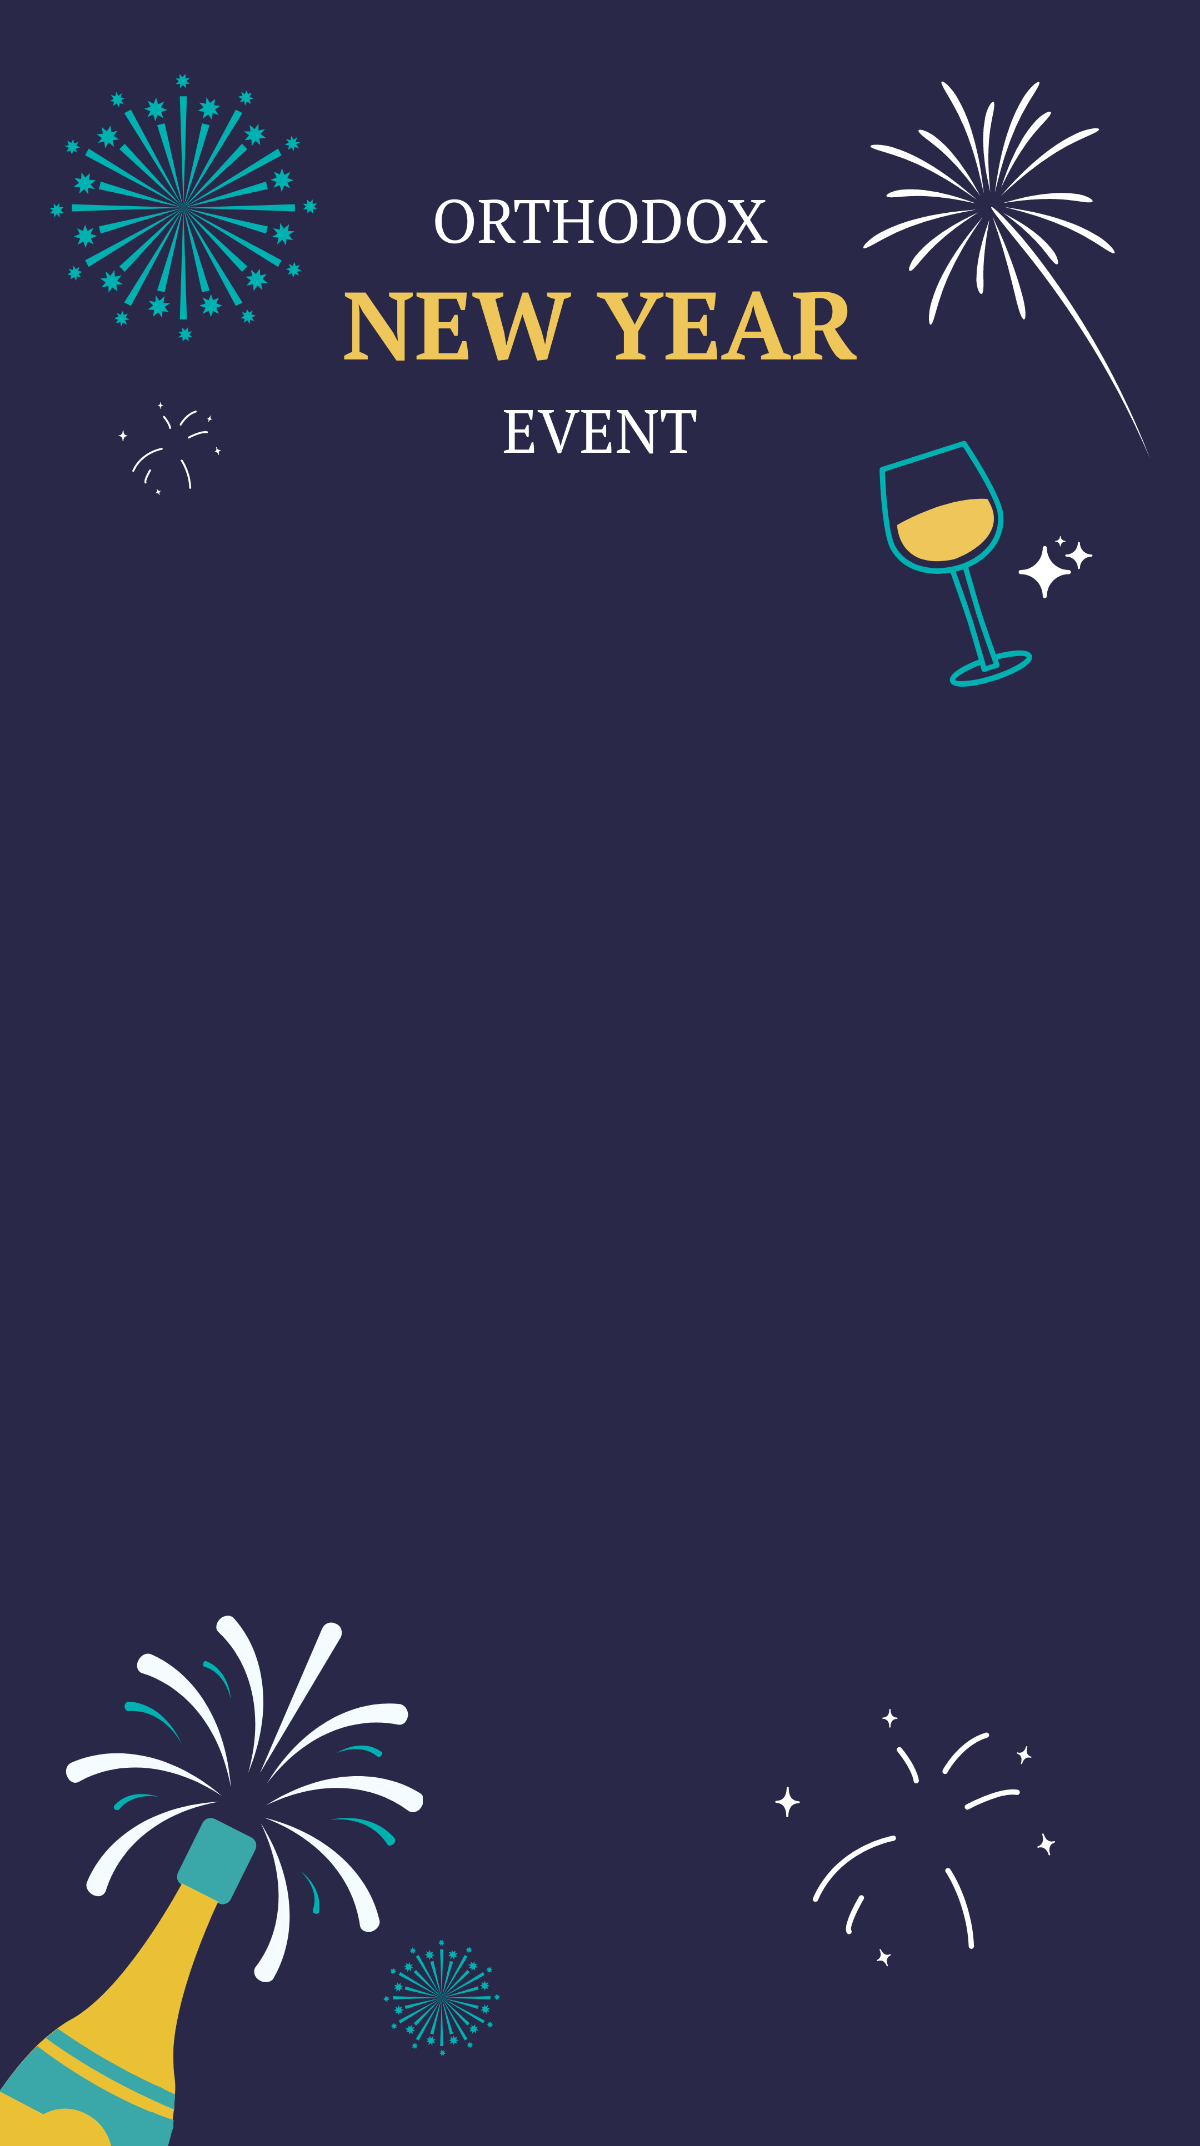 Orthodox New Year Event Snapchat Geofilter Template